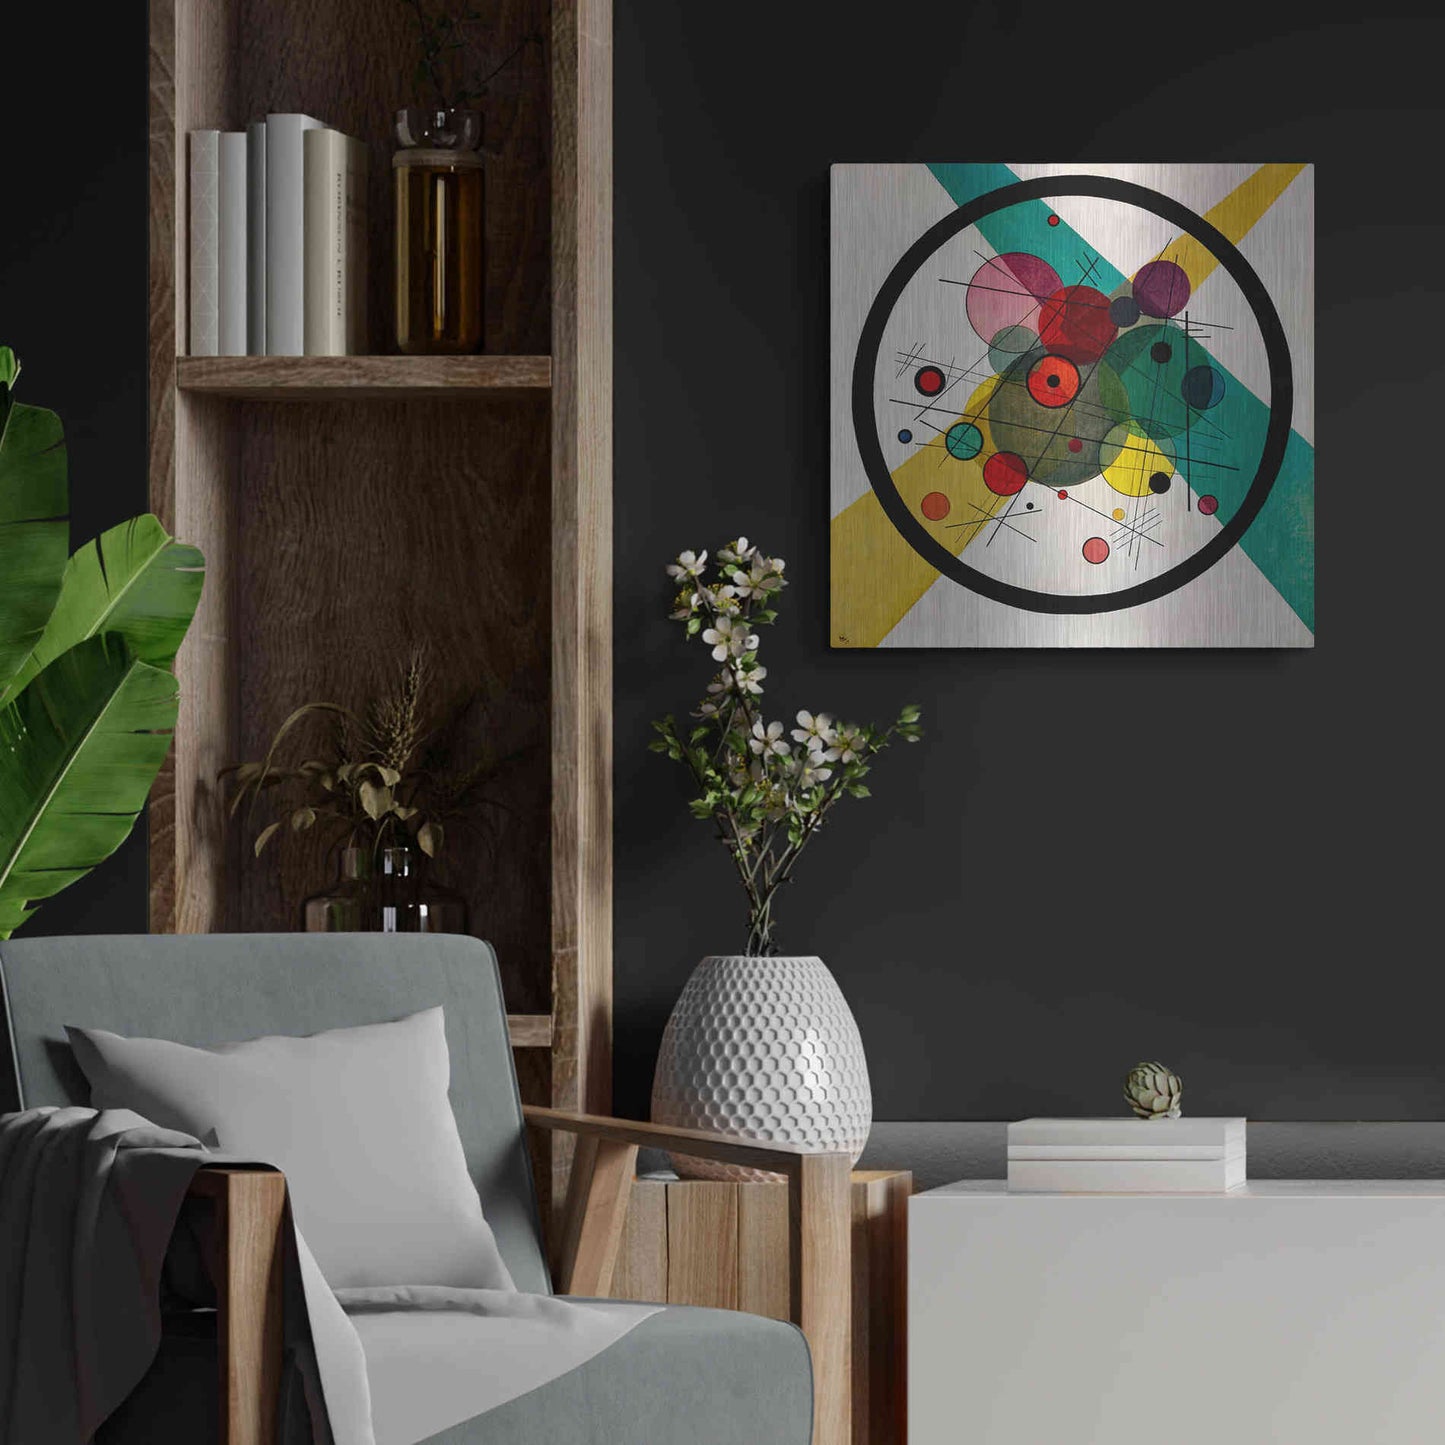 Luxe Metal Art 'Circles In A Circle' by Wassily Kandinsky, Metal Wall Art",24x24